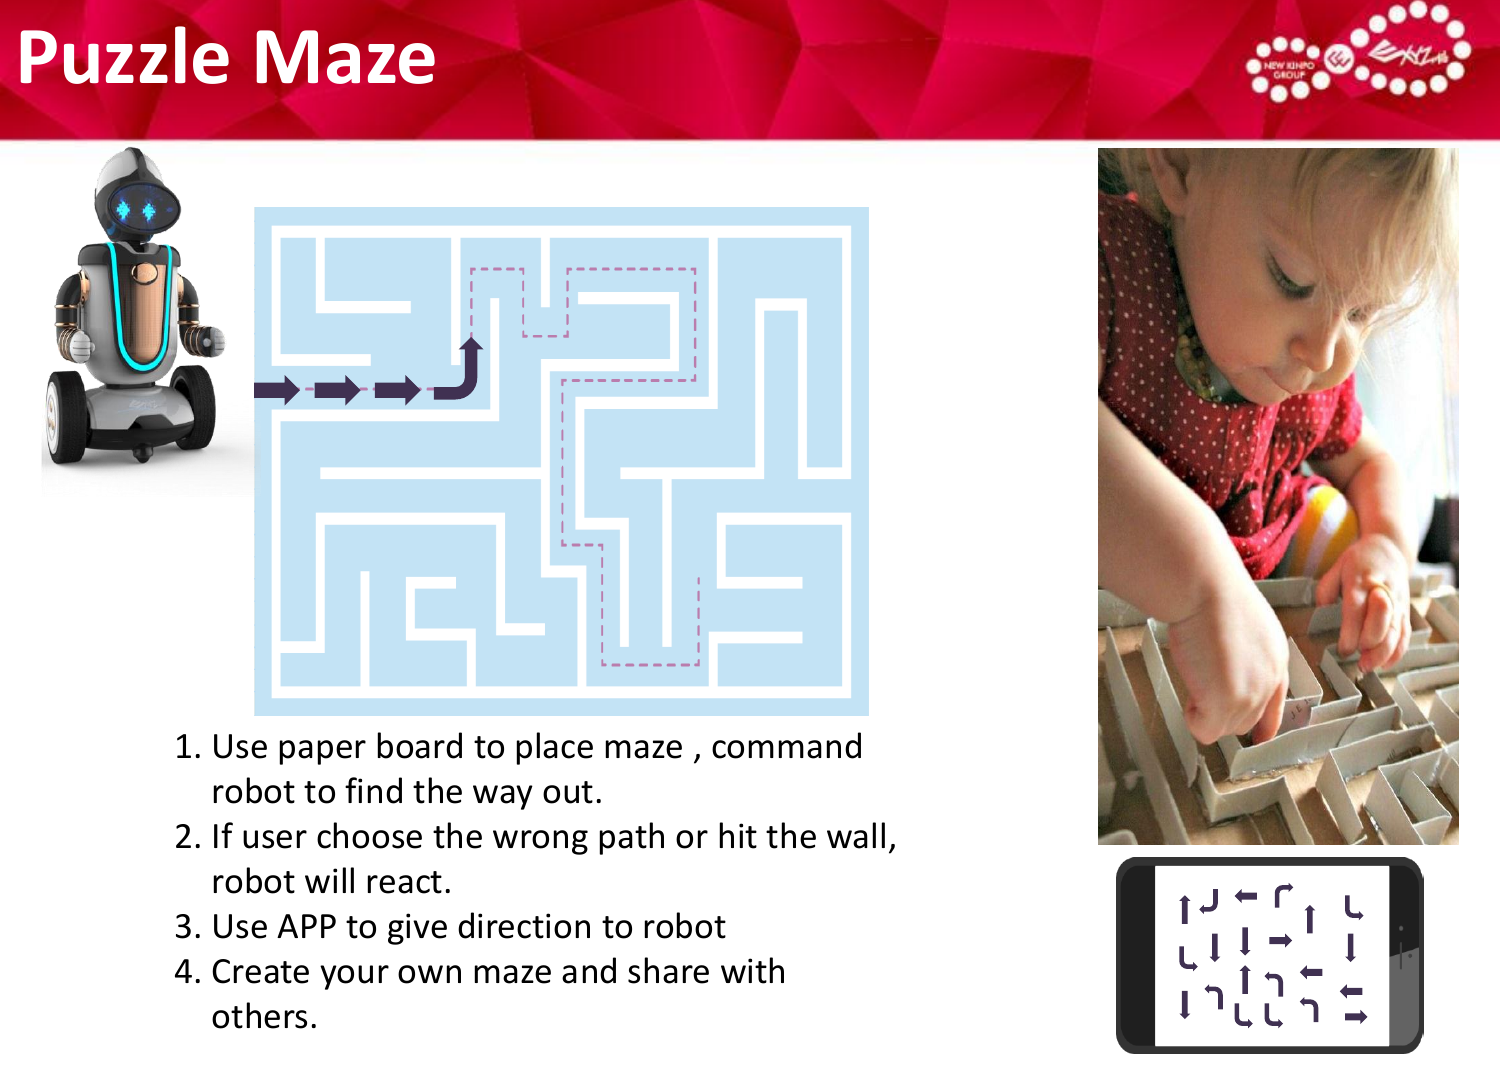 Puzzle Maze1. Use paper board to place maze , command robot to find the way out.2. If user choose the wrong path or hit the wall, robot will react.3. Use APP to give direction to robot4. Create your own maze and share with others.